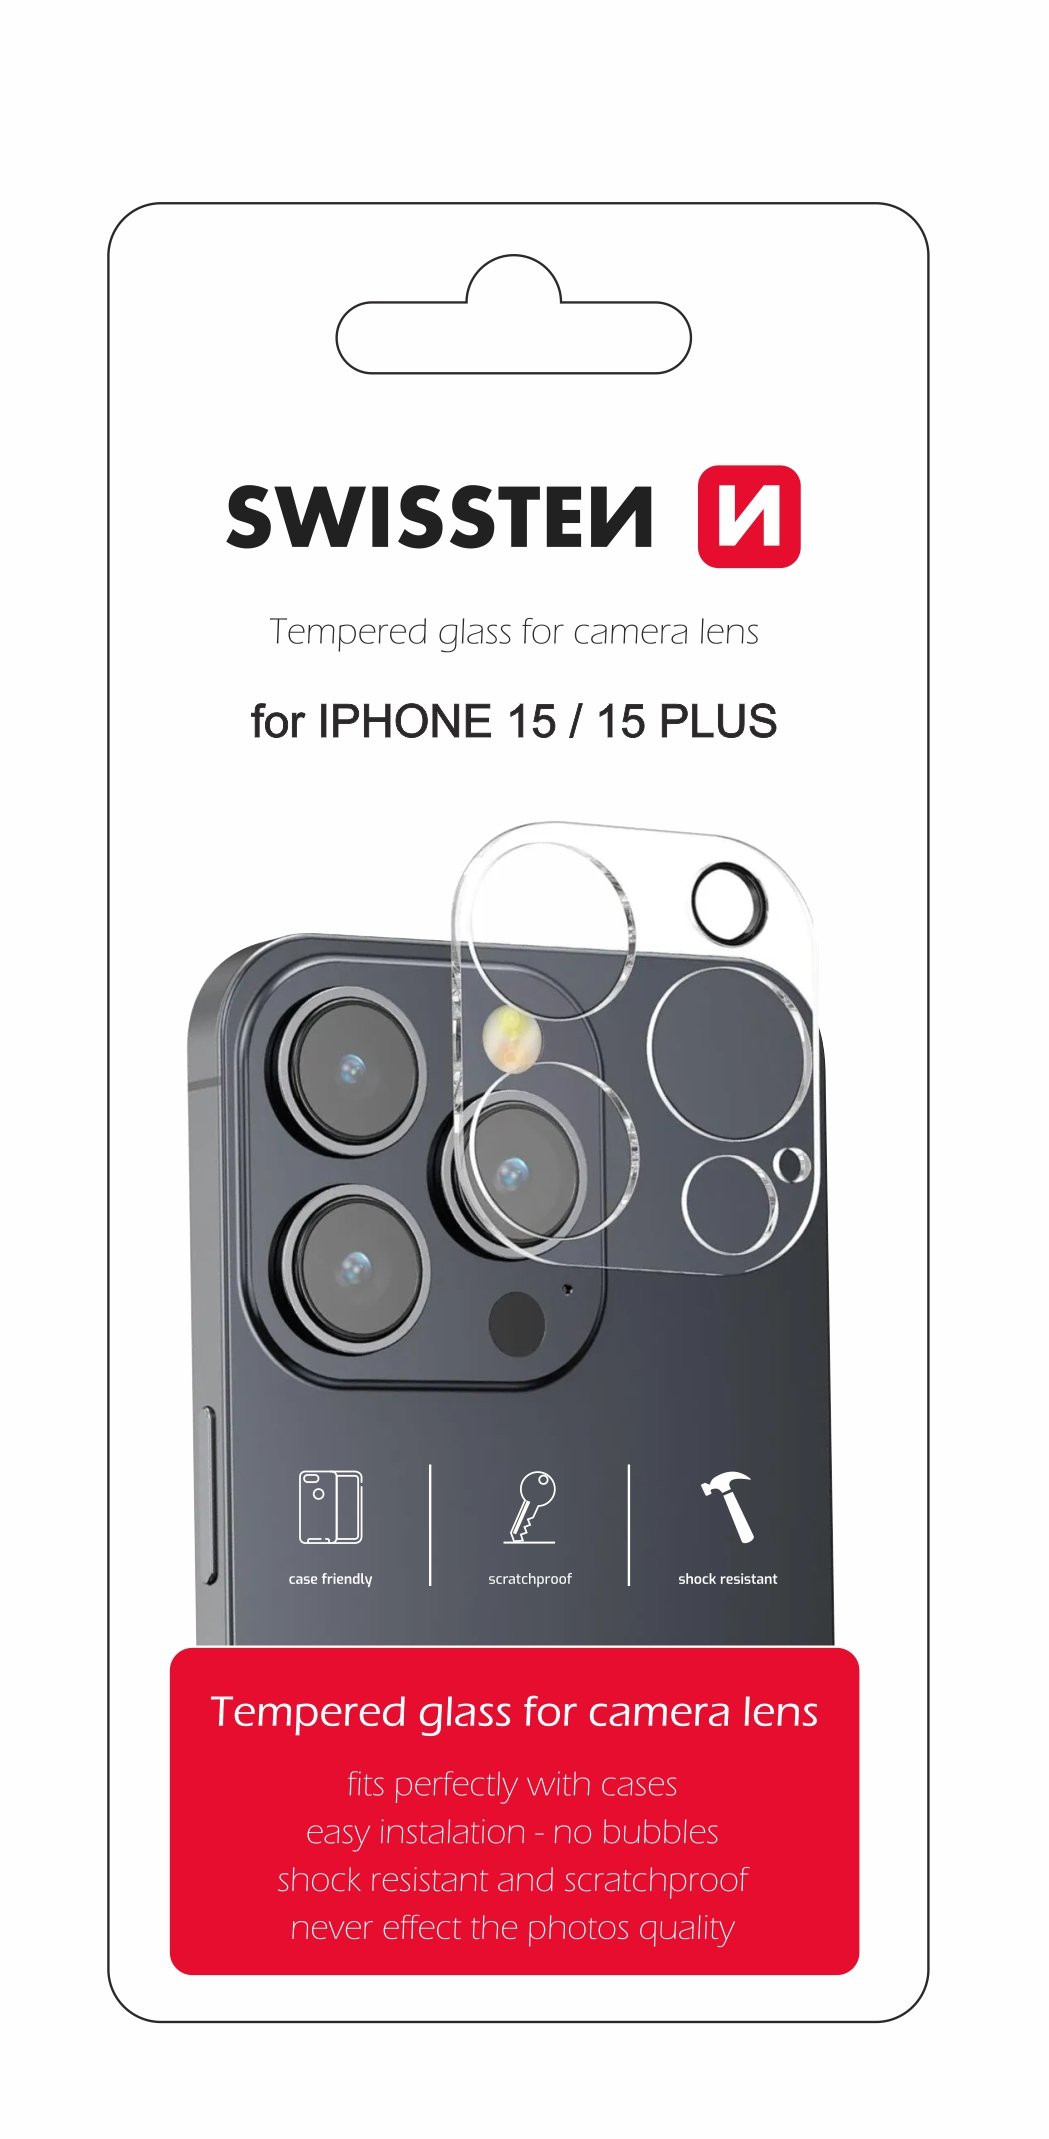 Swissten Tempered Glass For Camera Lens For Apple iPhone 15 / iPhone 15 Plus